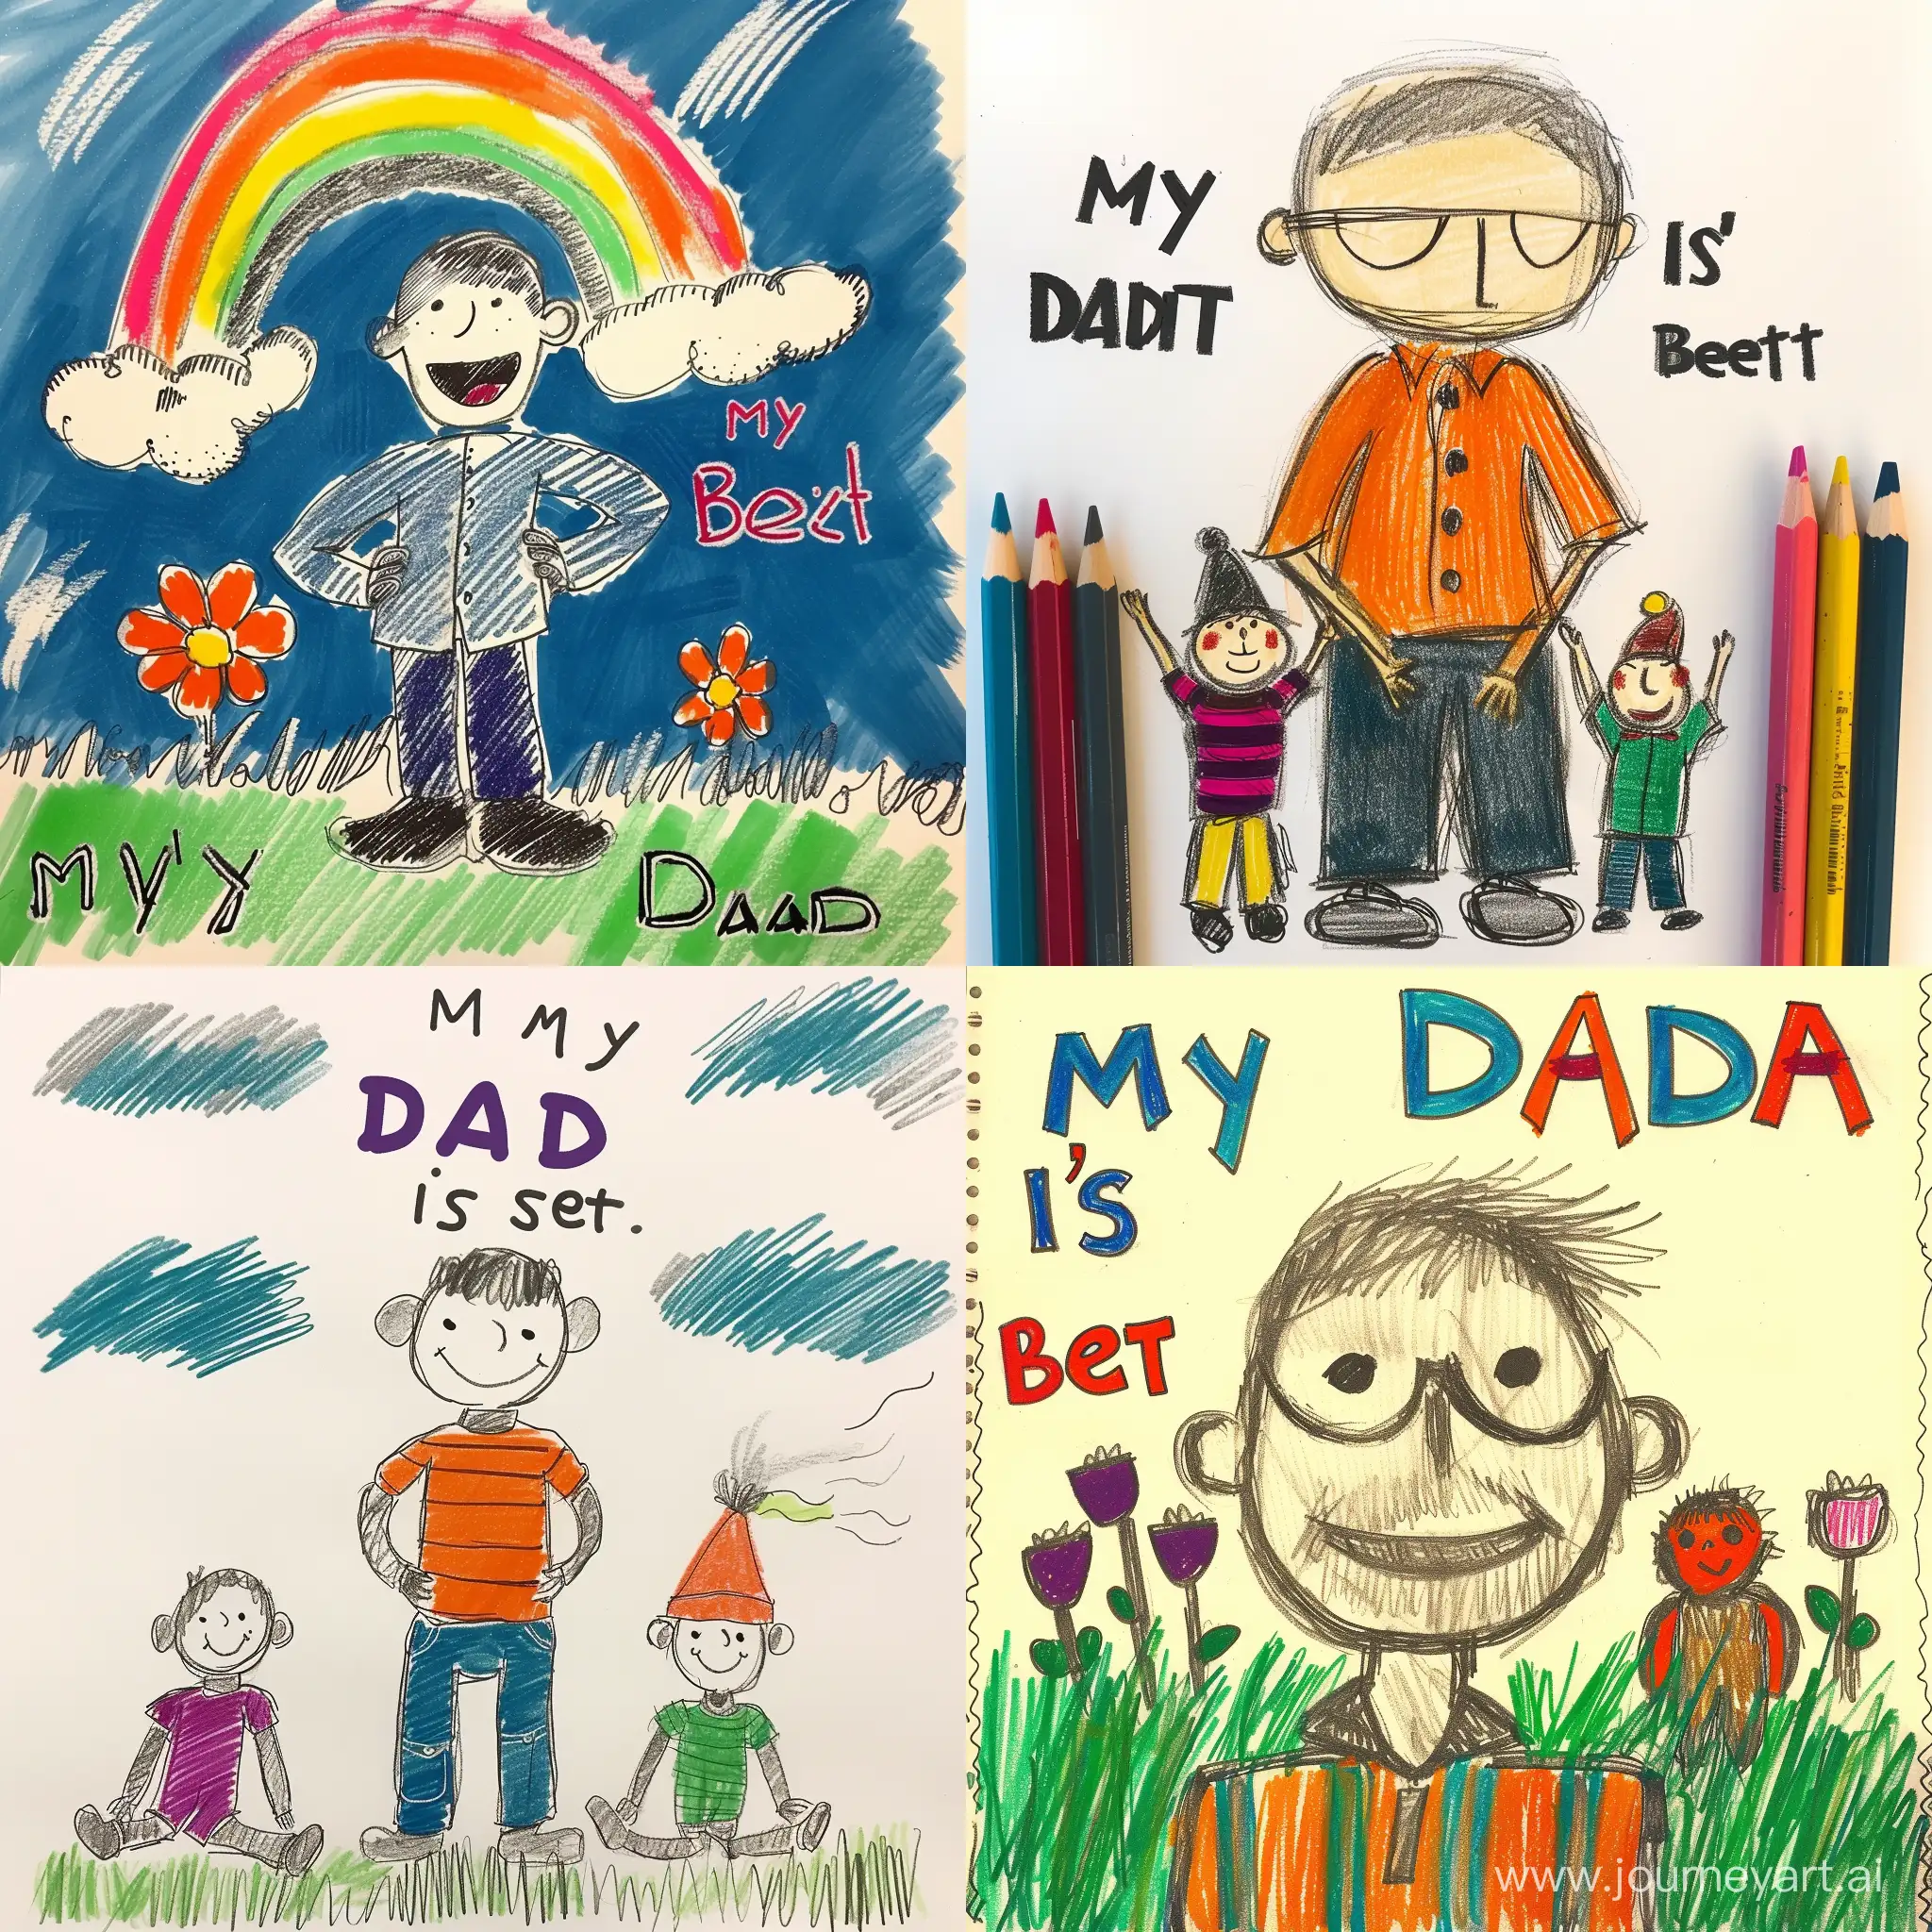 Heartwarming-Childs-Drawing-Tribute-to-the-Best-Dad